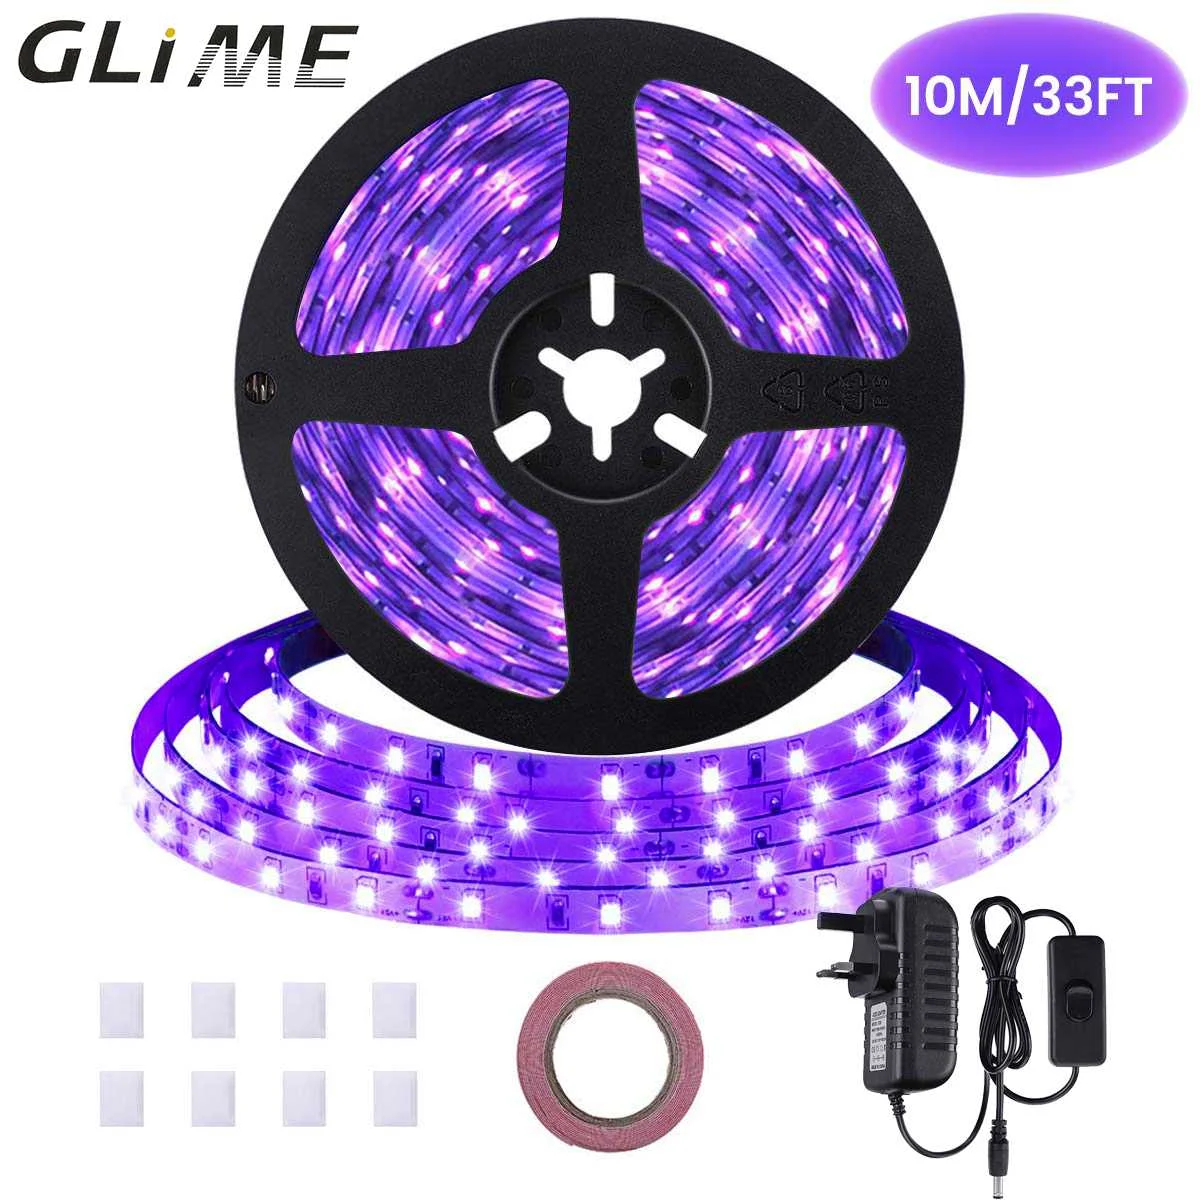 

GLIME 33ft/10M Led Light Strip Flexible 12V 2A UV Purple 600 Leds for Home Party Stage Gallery Christmas Halloween Decor US Plug